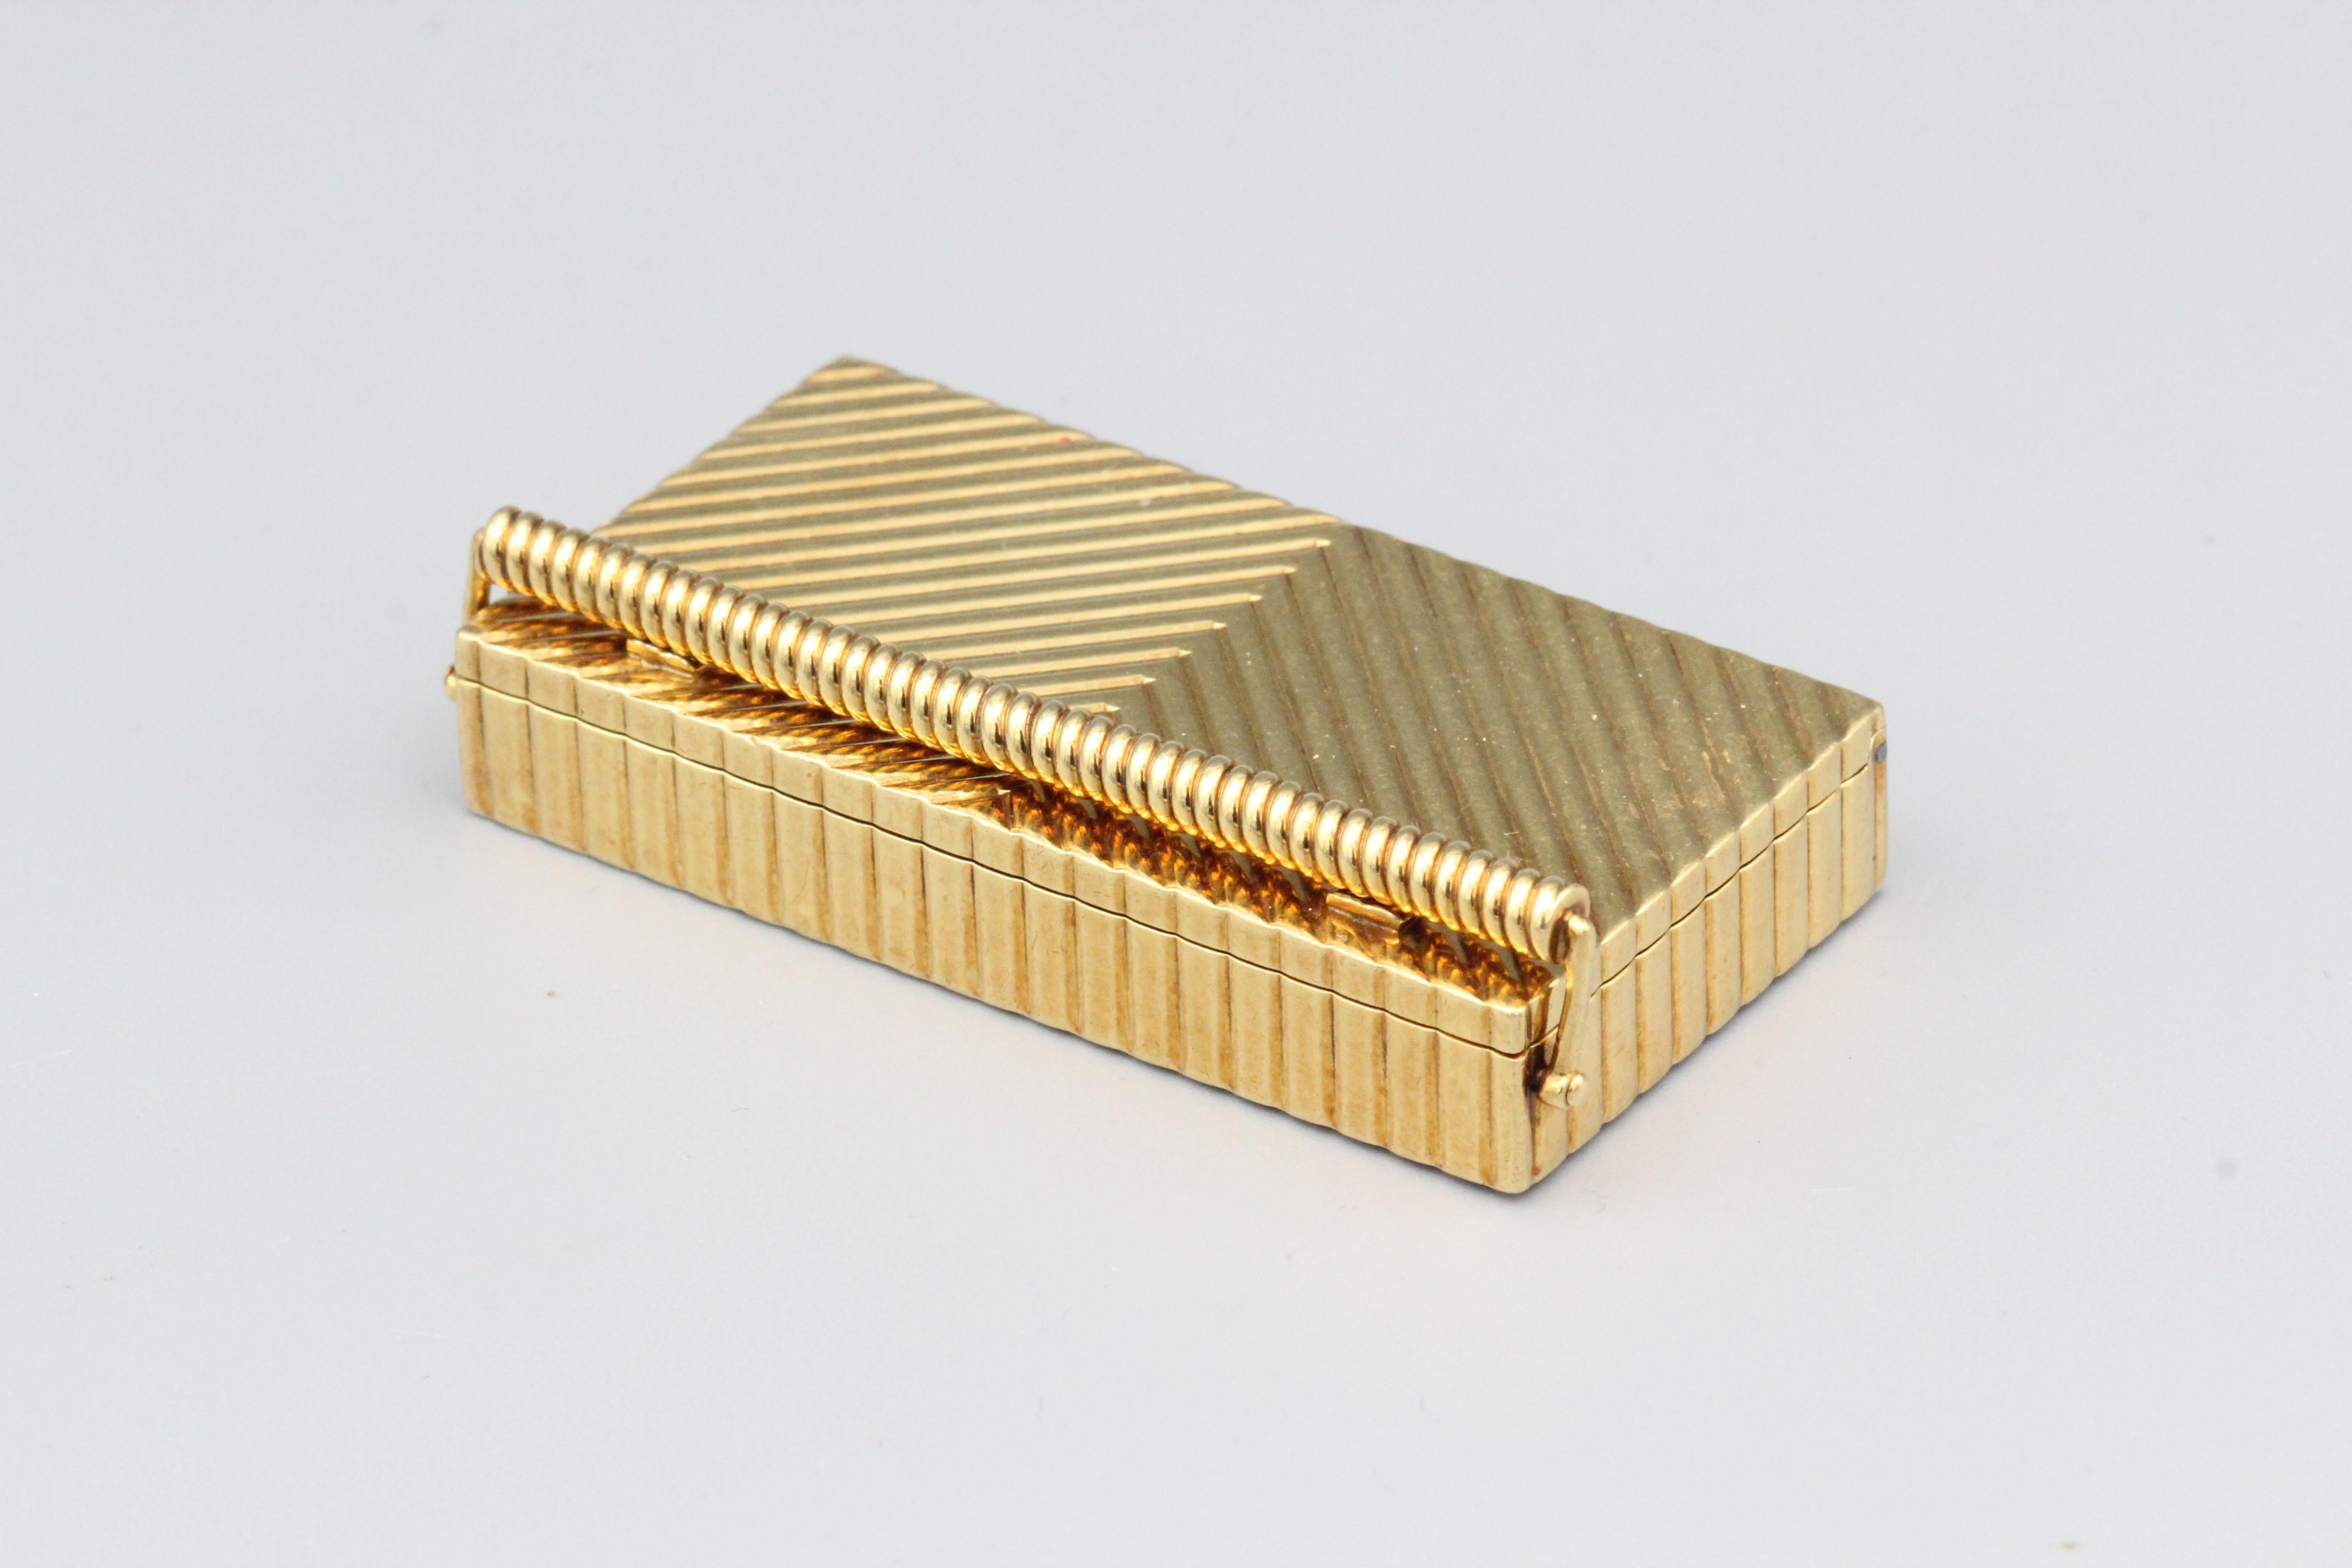 Fine 2 section 18k yellow gold pill box, by Bulgari circa 1950s.

This Bulgari geometric design pill box is a rare and exquisite piece of vintage jewelry. This pill box is crafted from high-quality 18k yellow gold, giving it a luxurious and